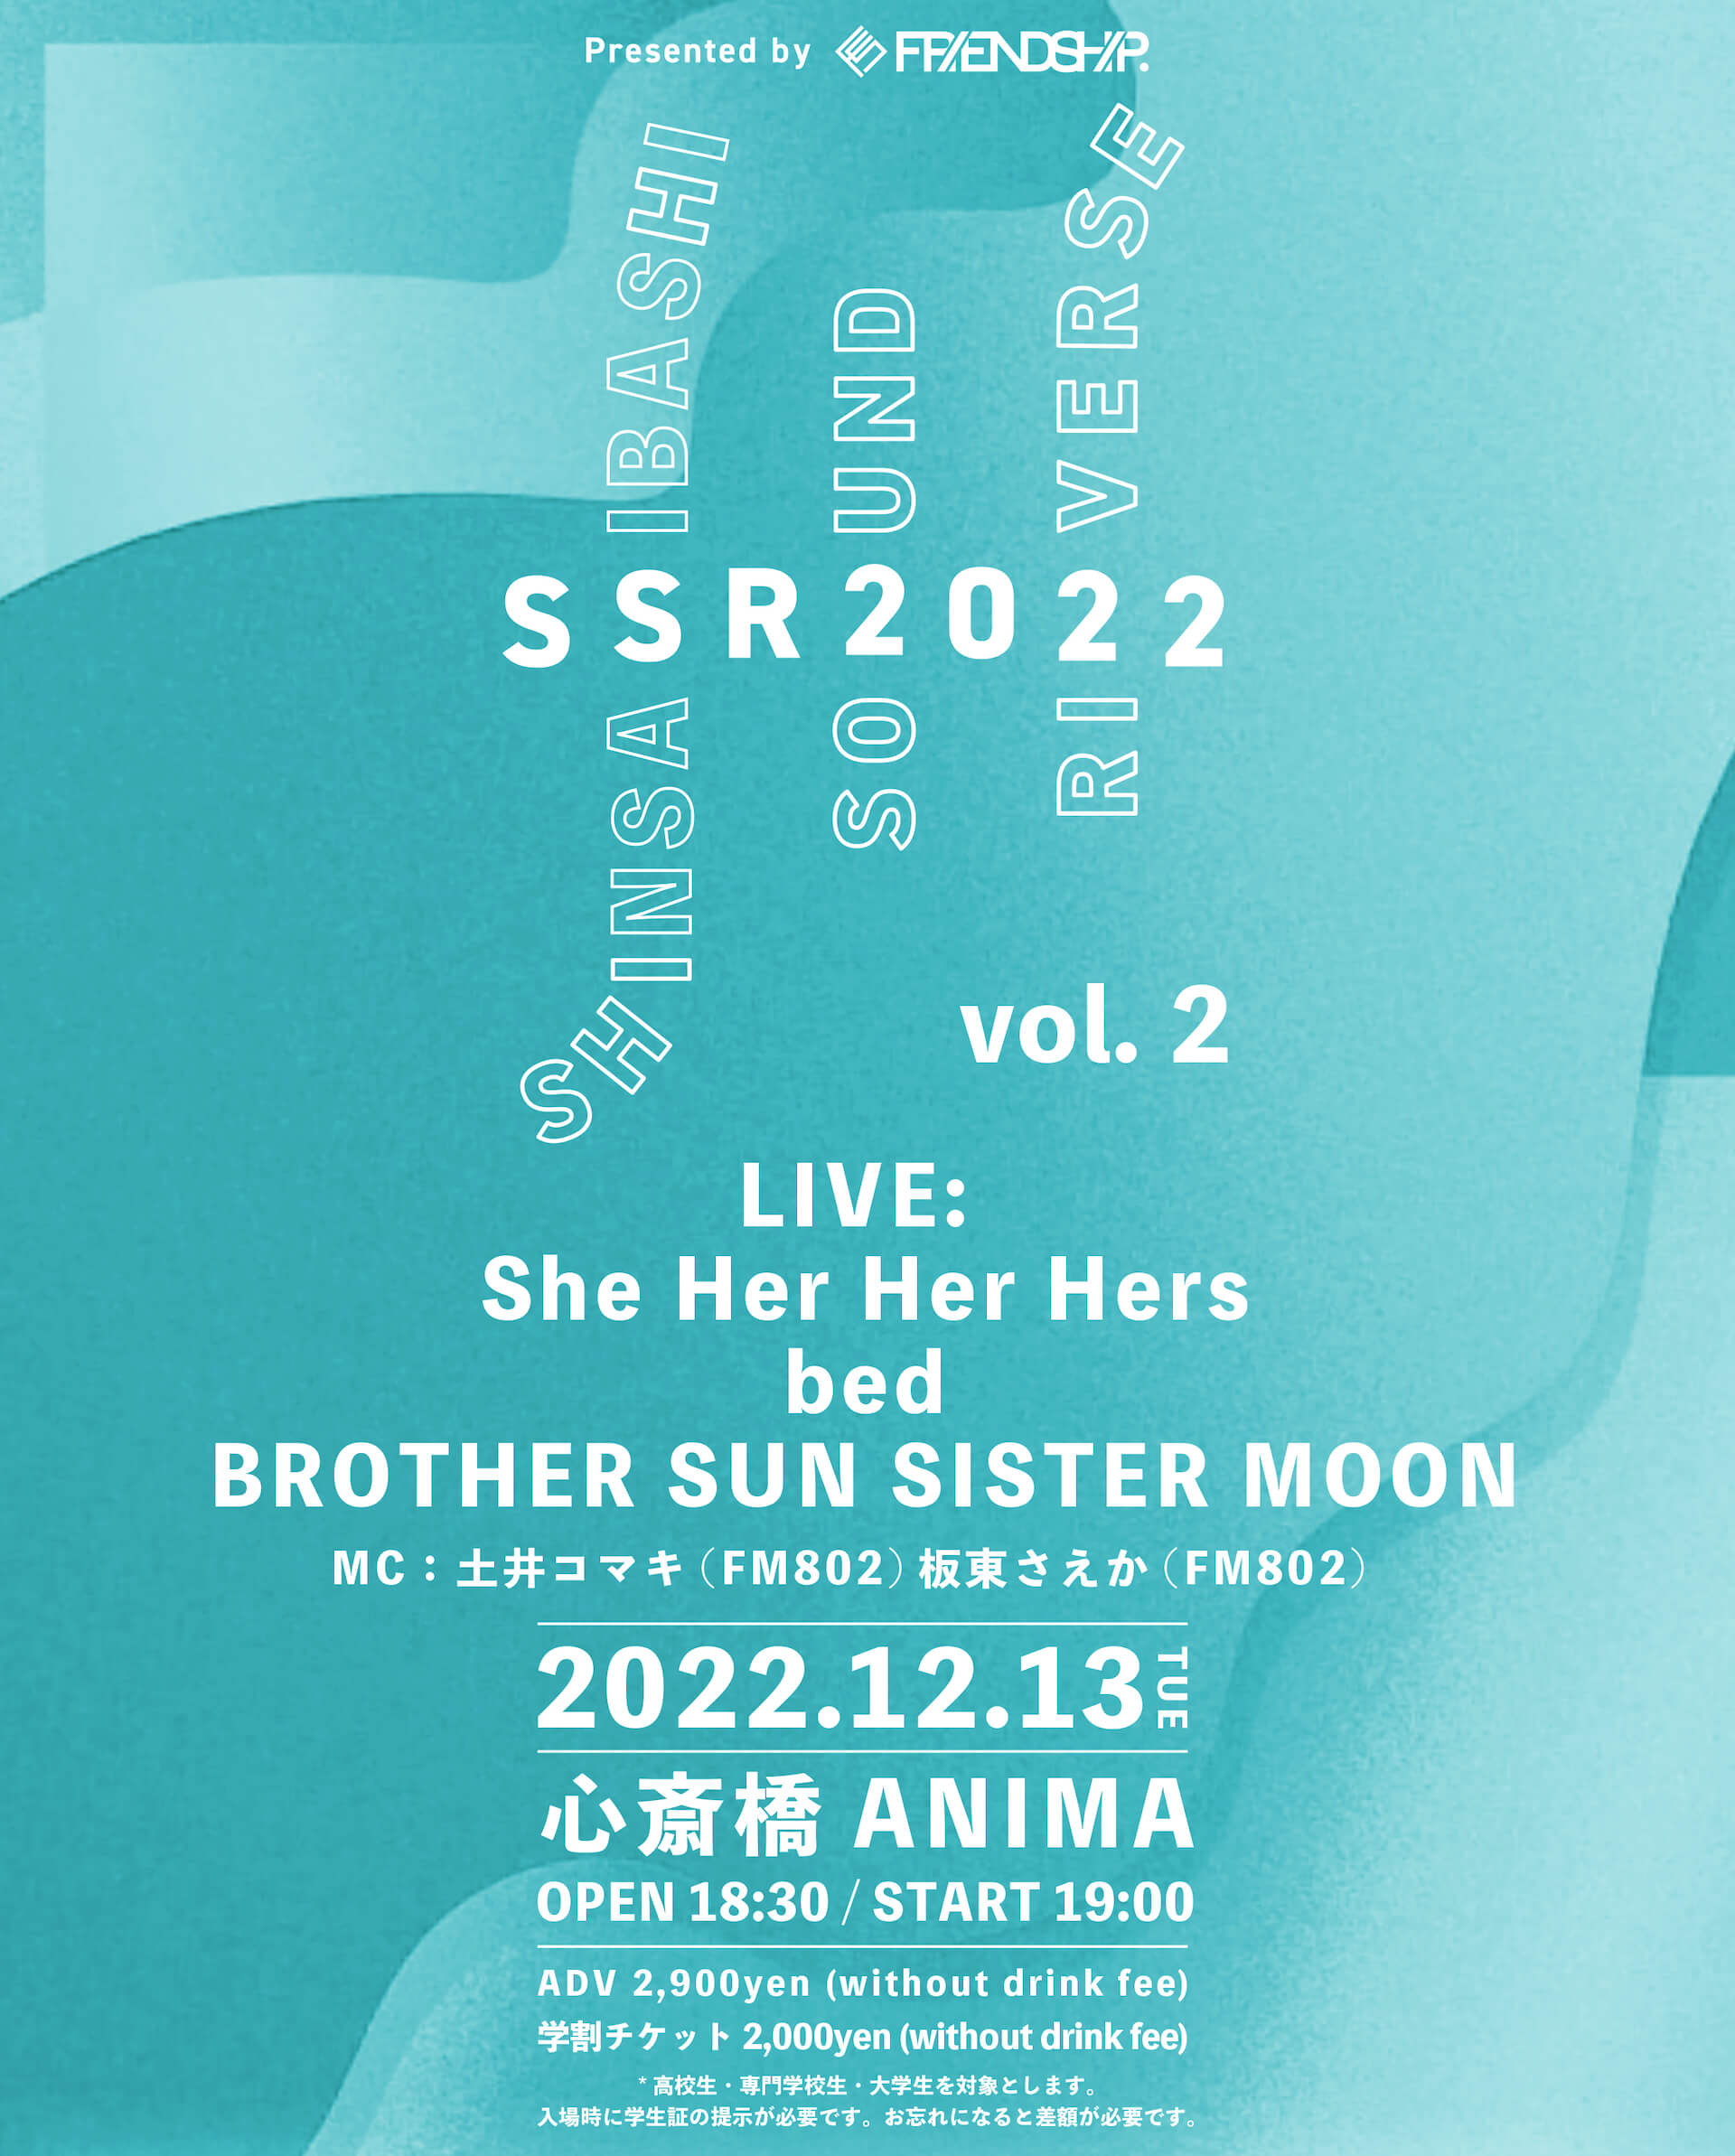 She Her Her Hers、bed、BROTHER SUN SISTER MOONが登場！FRIENDSHIP 